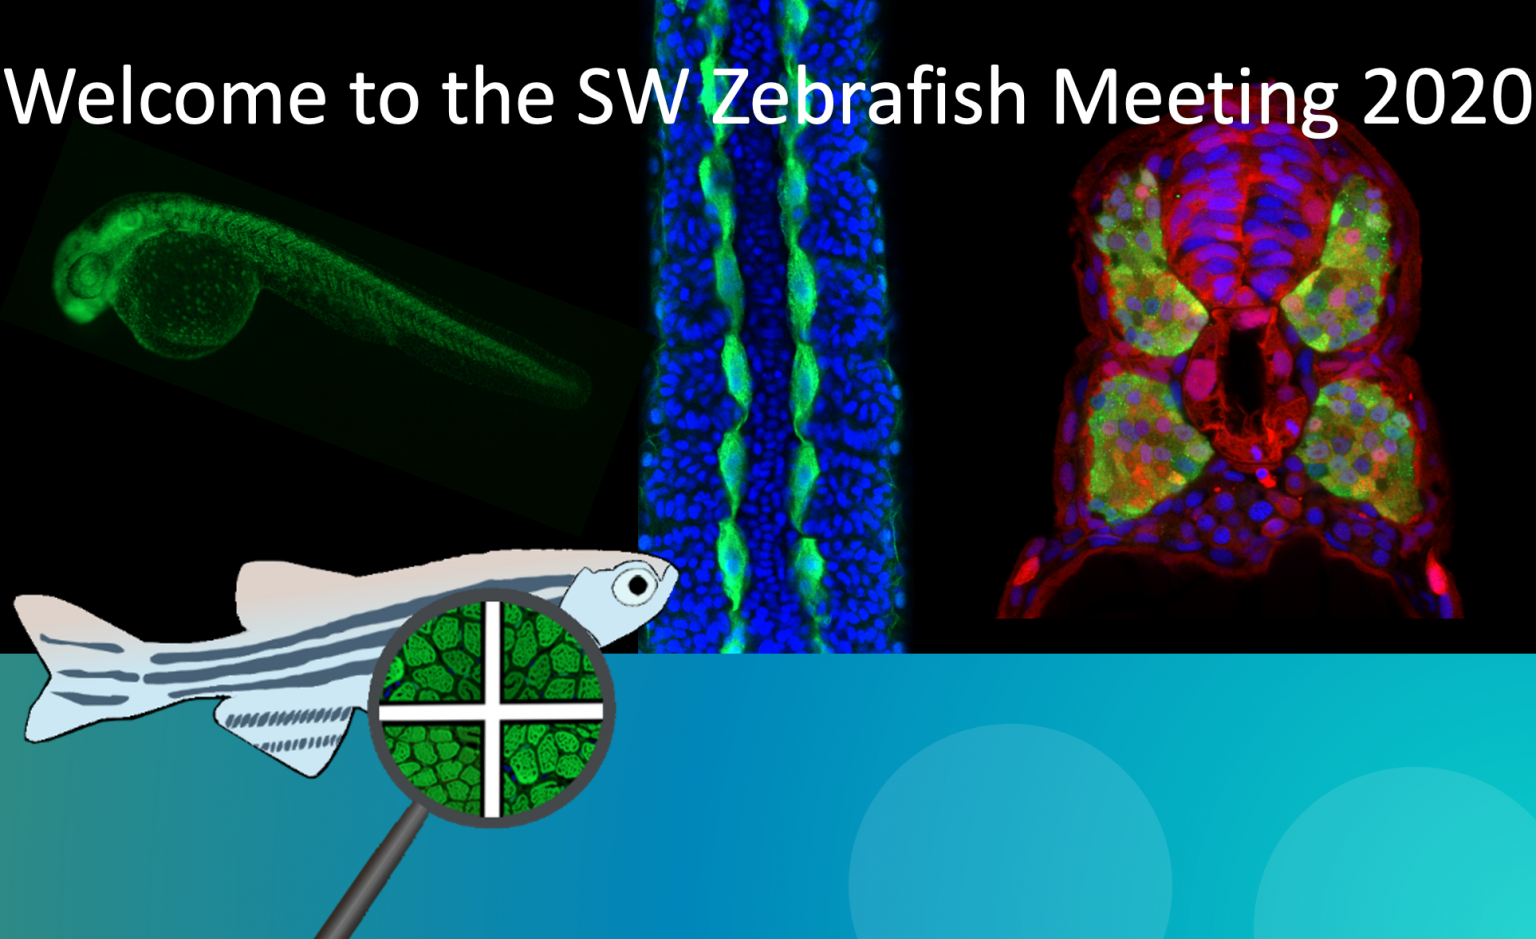 The Southwest of the UK a thriving environment for zebrafish research